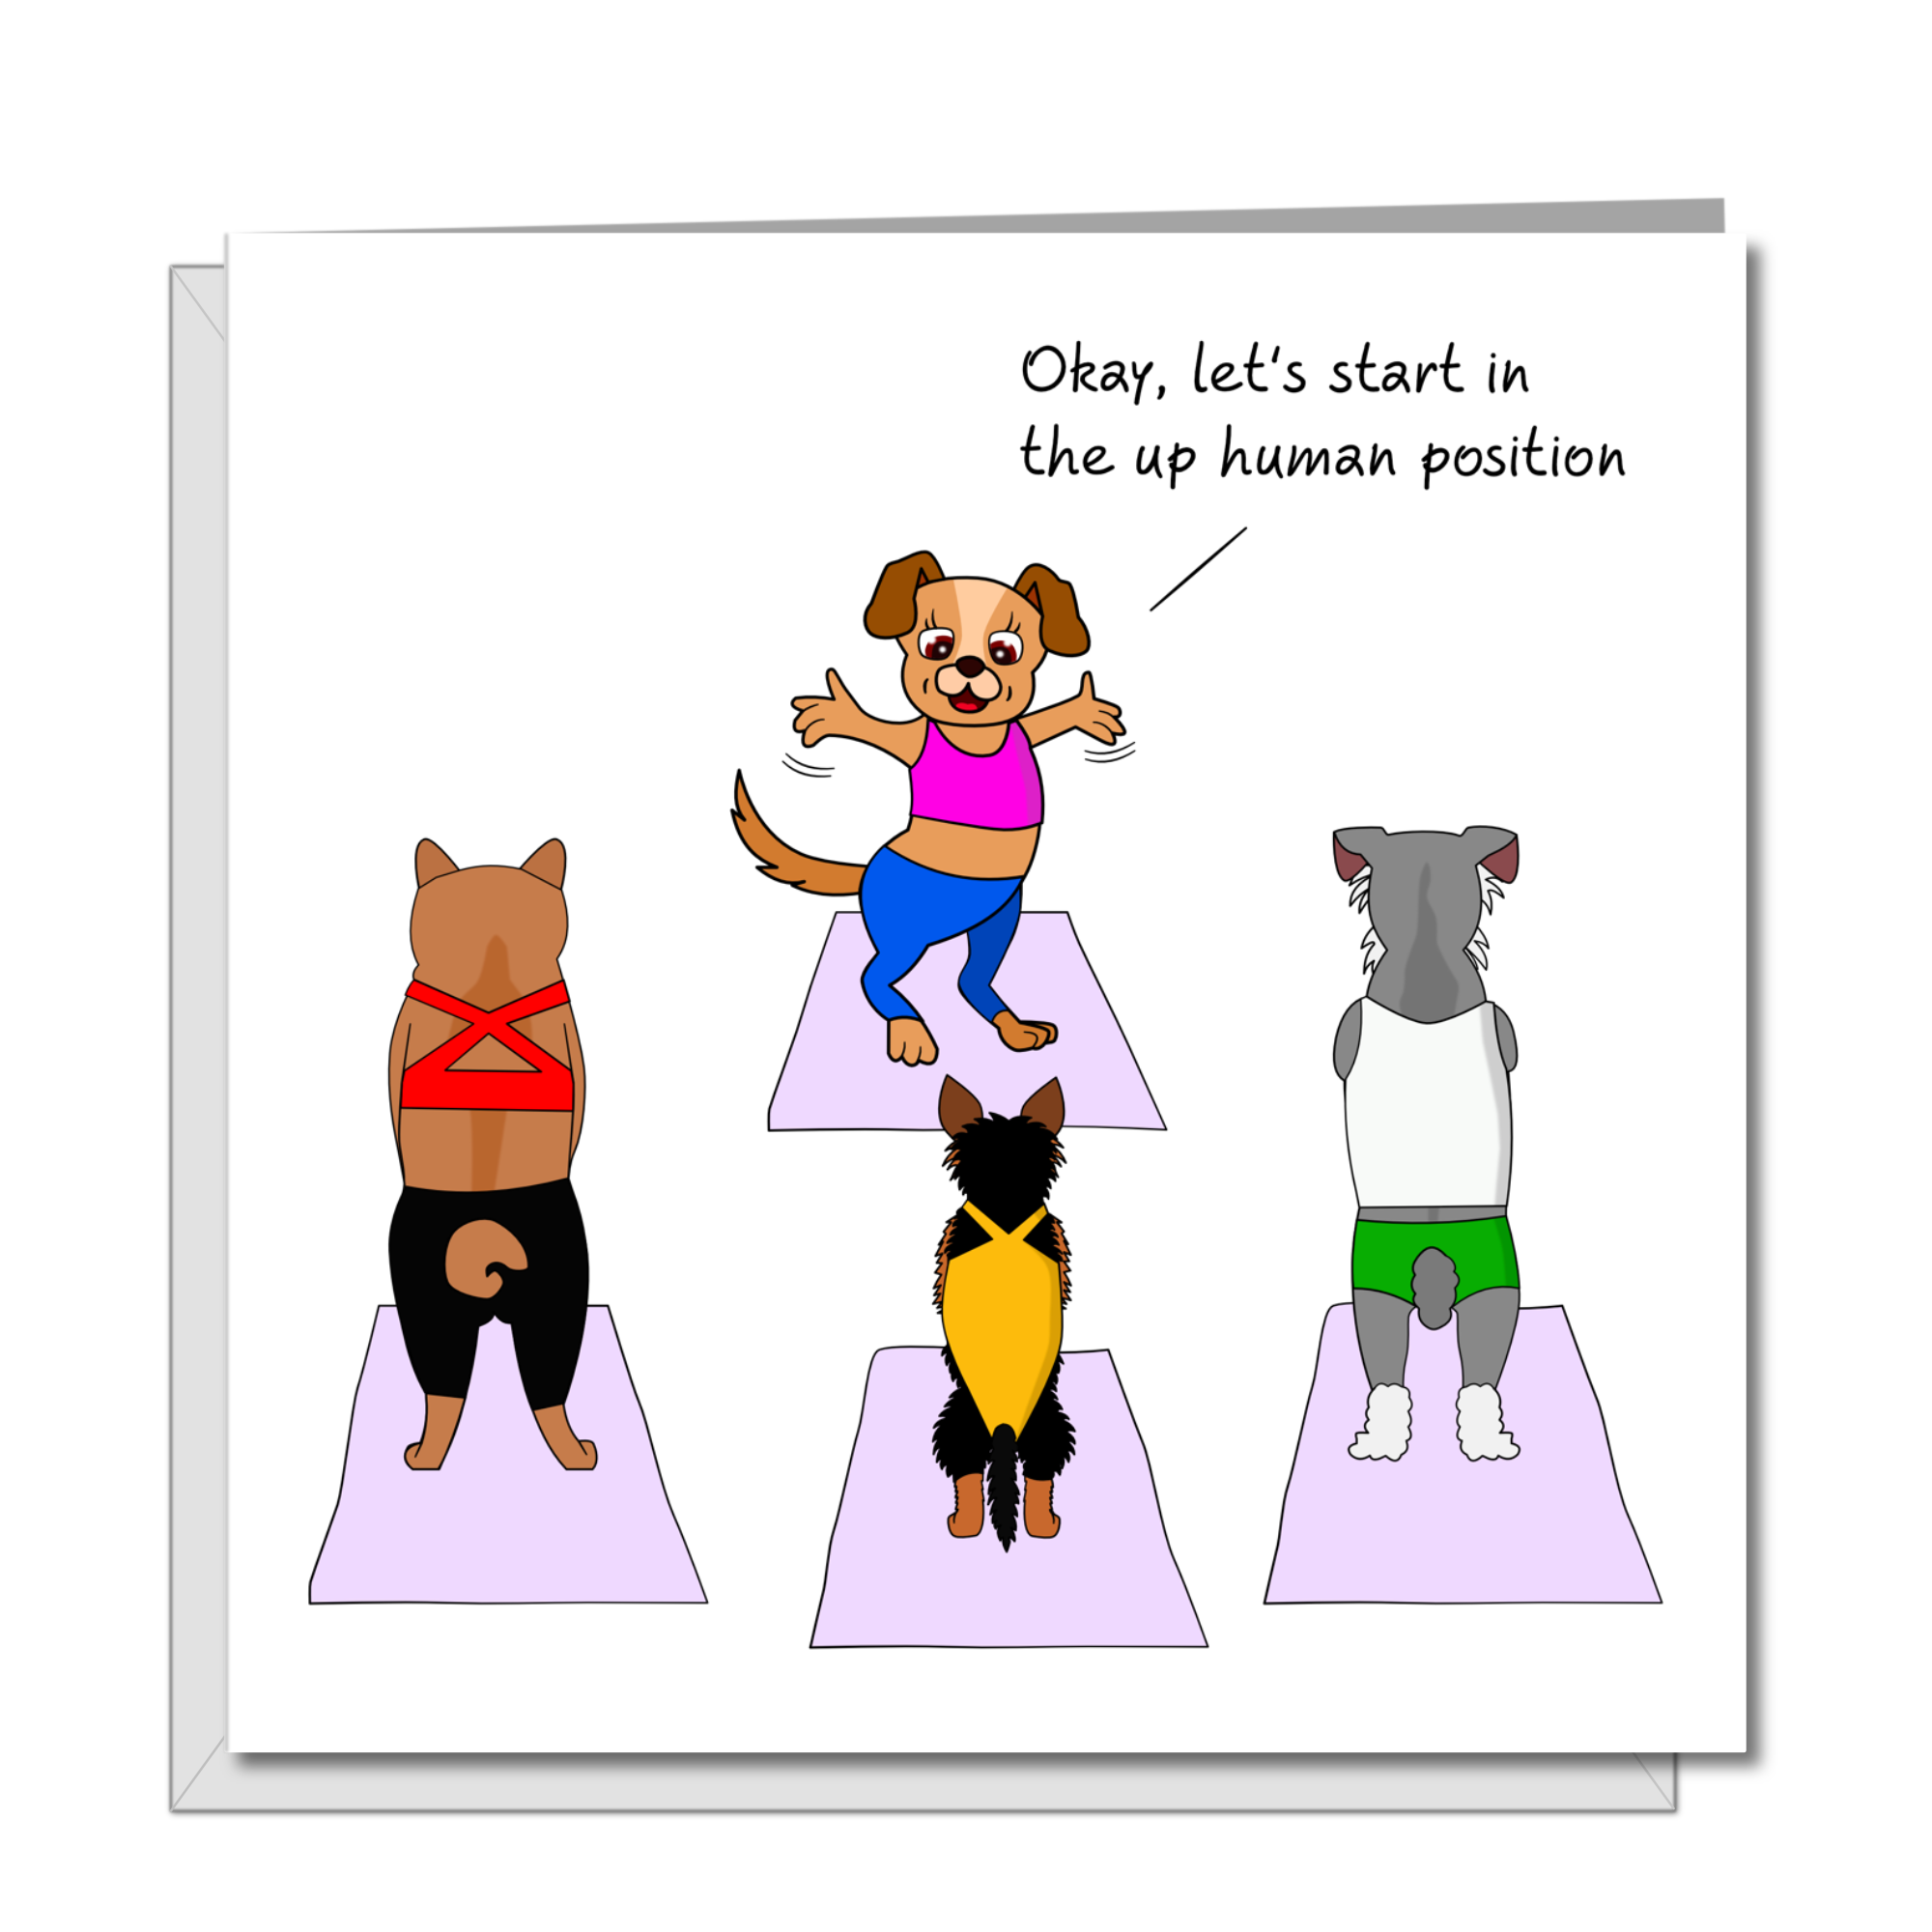 Funny Pilates Birthday Card - Pilates Yoga Mindfulness - Mum Mom Girlfriend or Girl Friend - Any occasion card. Funny, humorous and amusing